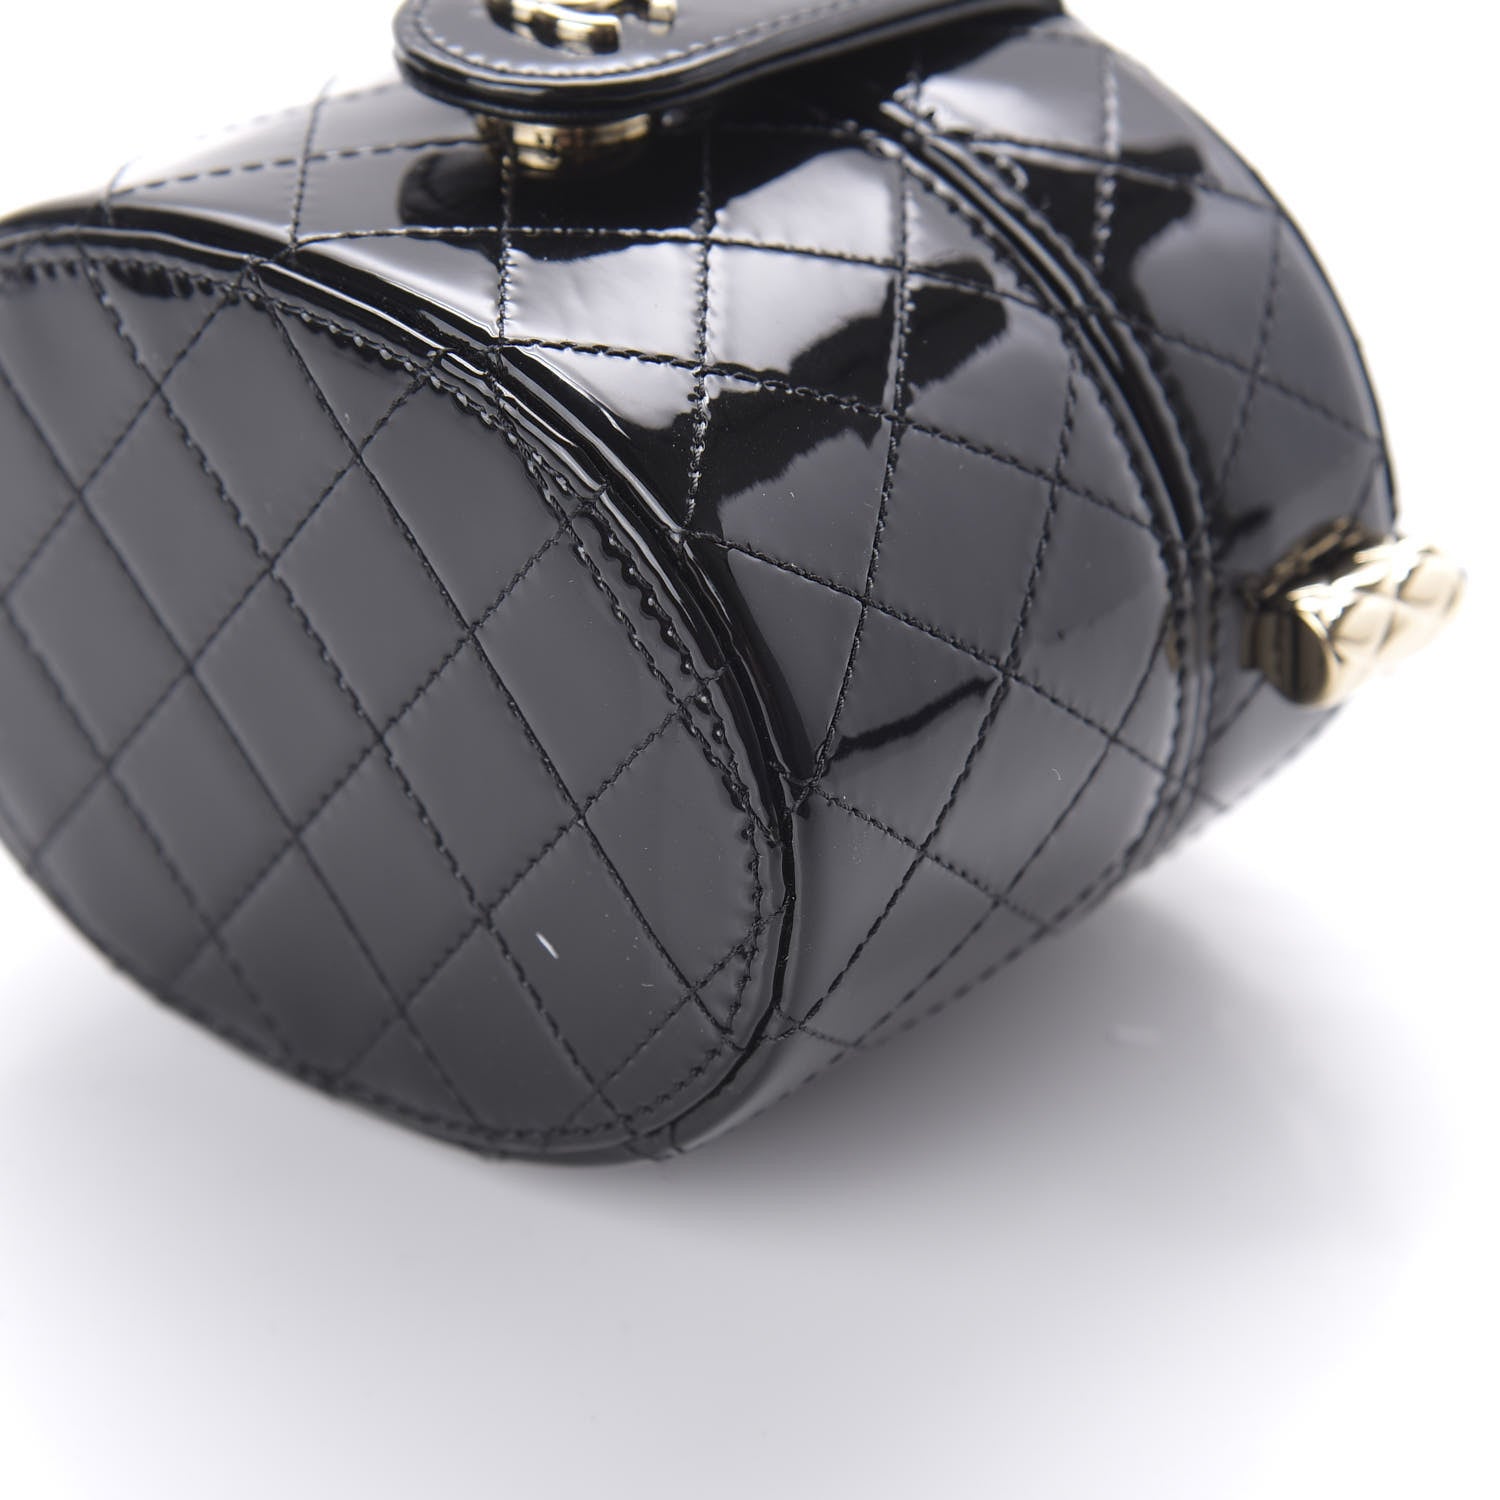 Lot - Mini CHANEL Black Quilted Patent Leather Bag